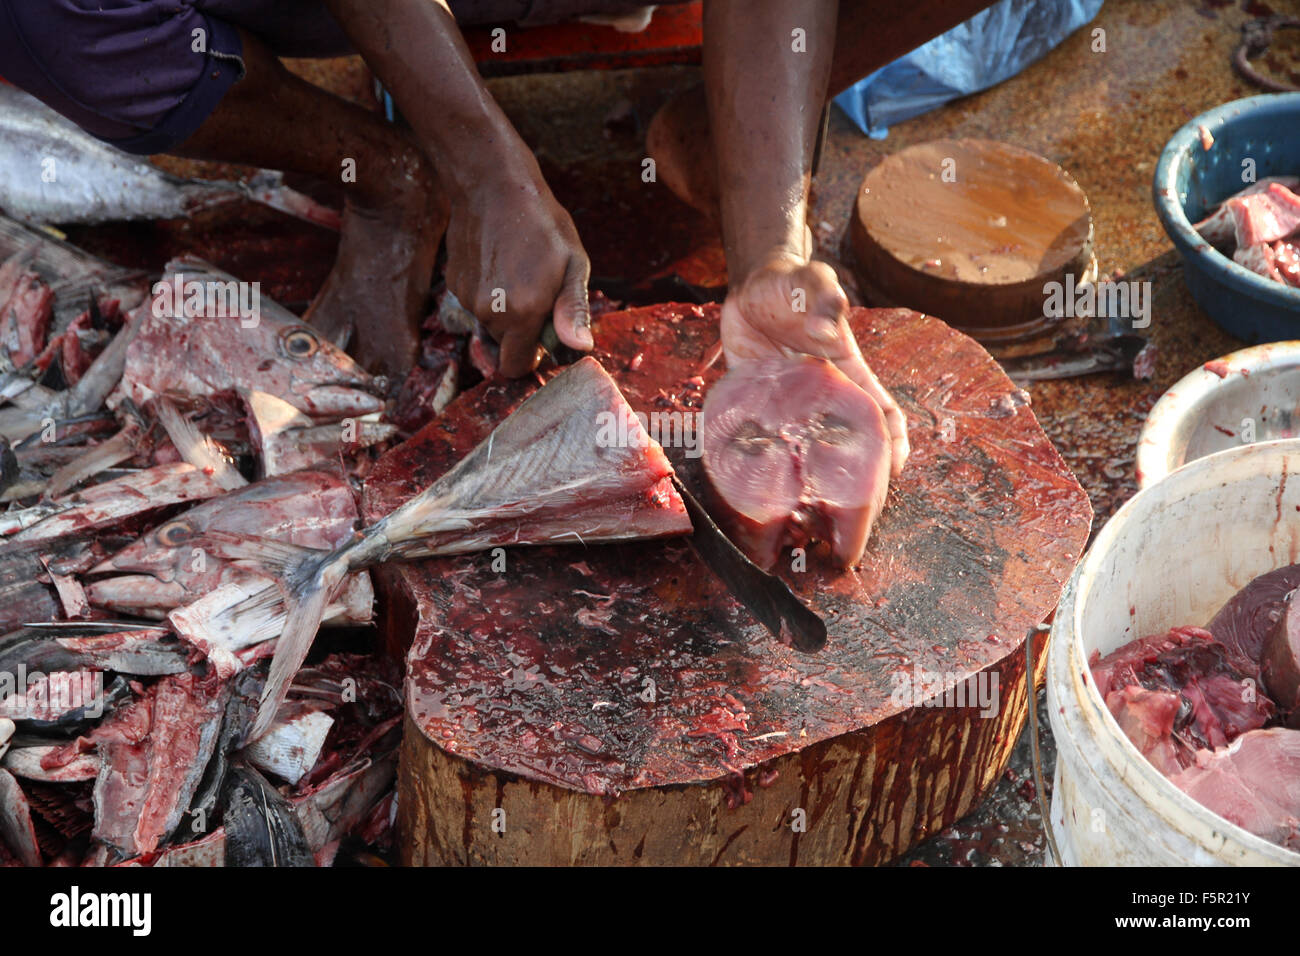 A man is cutting and preparing the fish at the fish market Stock Photo